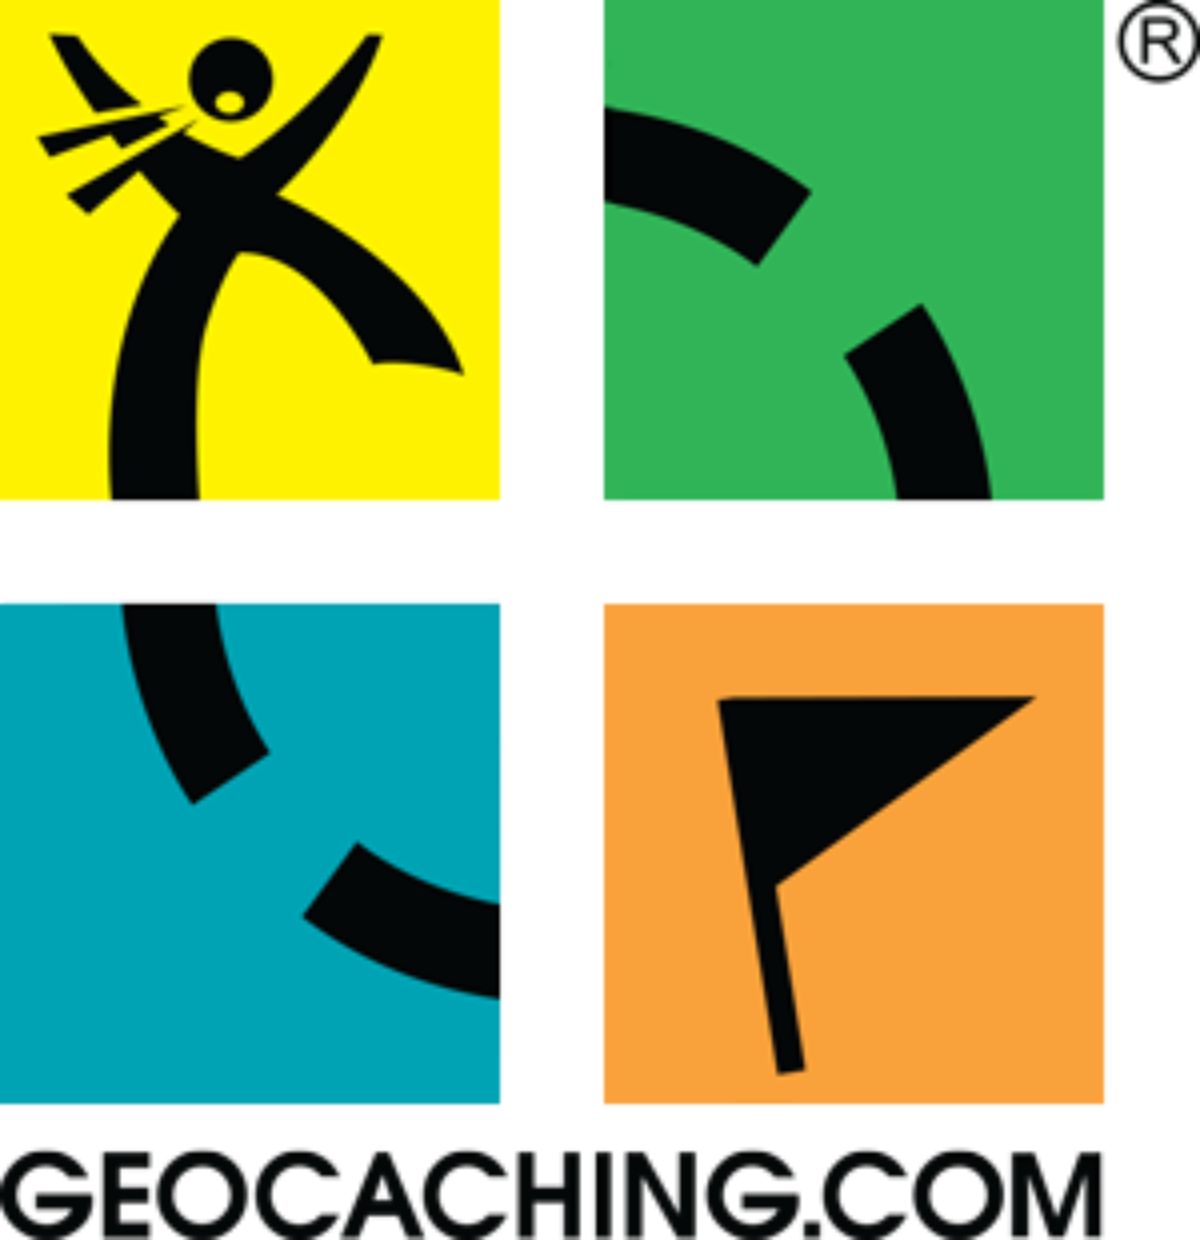 The text reads "Geocaching.com". 4 colored squares can be seen with black graphics on top of them